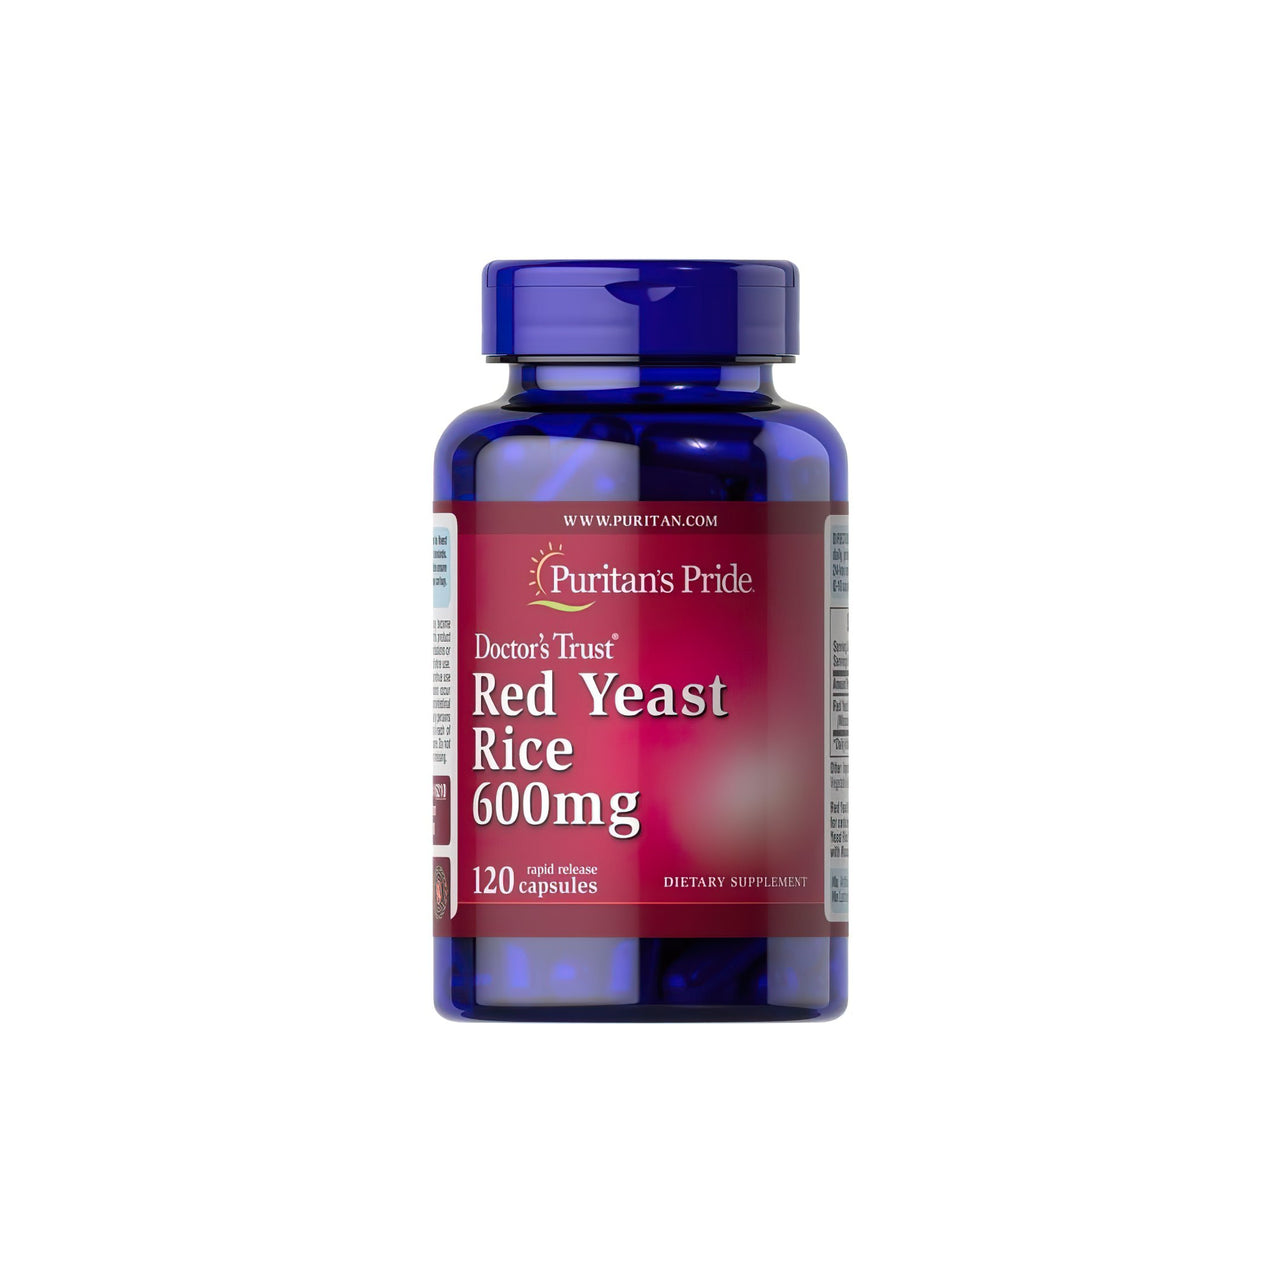 Red Yeast Rice 600 mg 120 capsules by Puritan's Pride is a natural supplement that promotes cardiovascular health and maintains healthy cholesterol levels. Each serving provides 1000mg of red yeast rice.